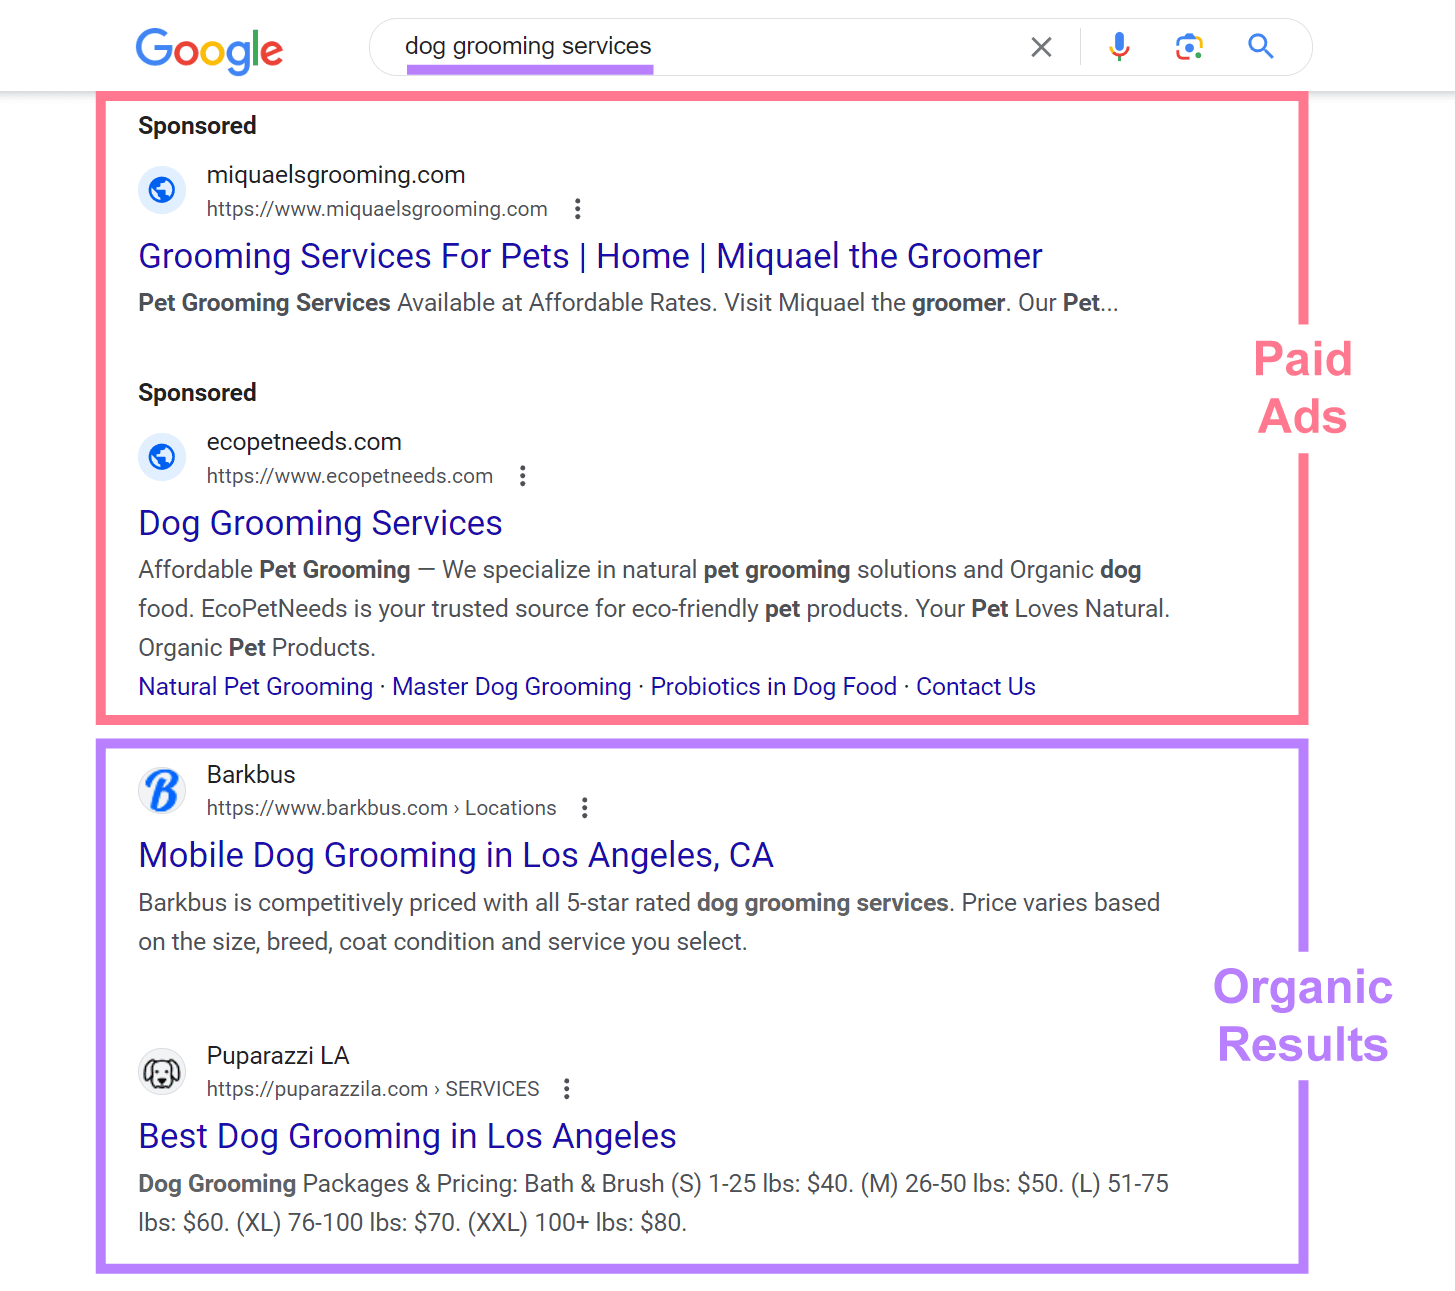 Paid ads and organic results on Google SERP for " grooming services" query